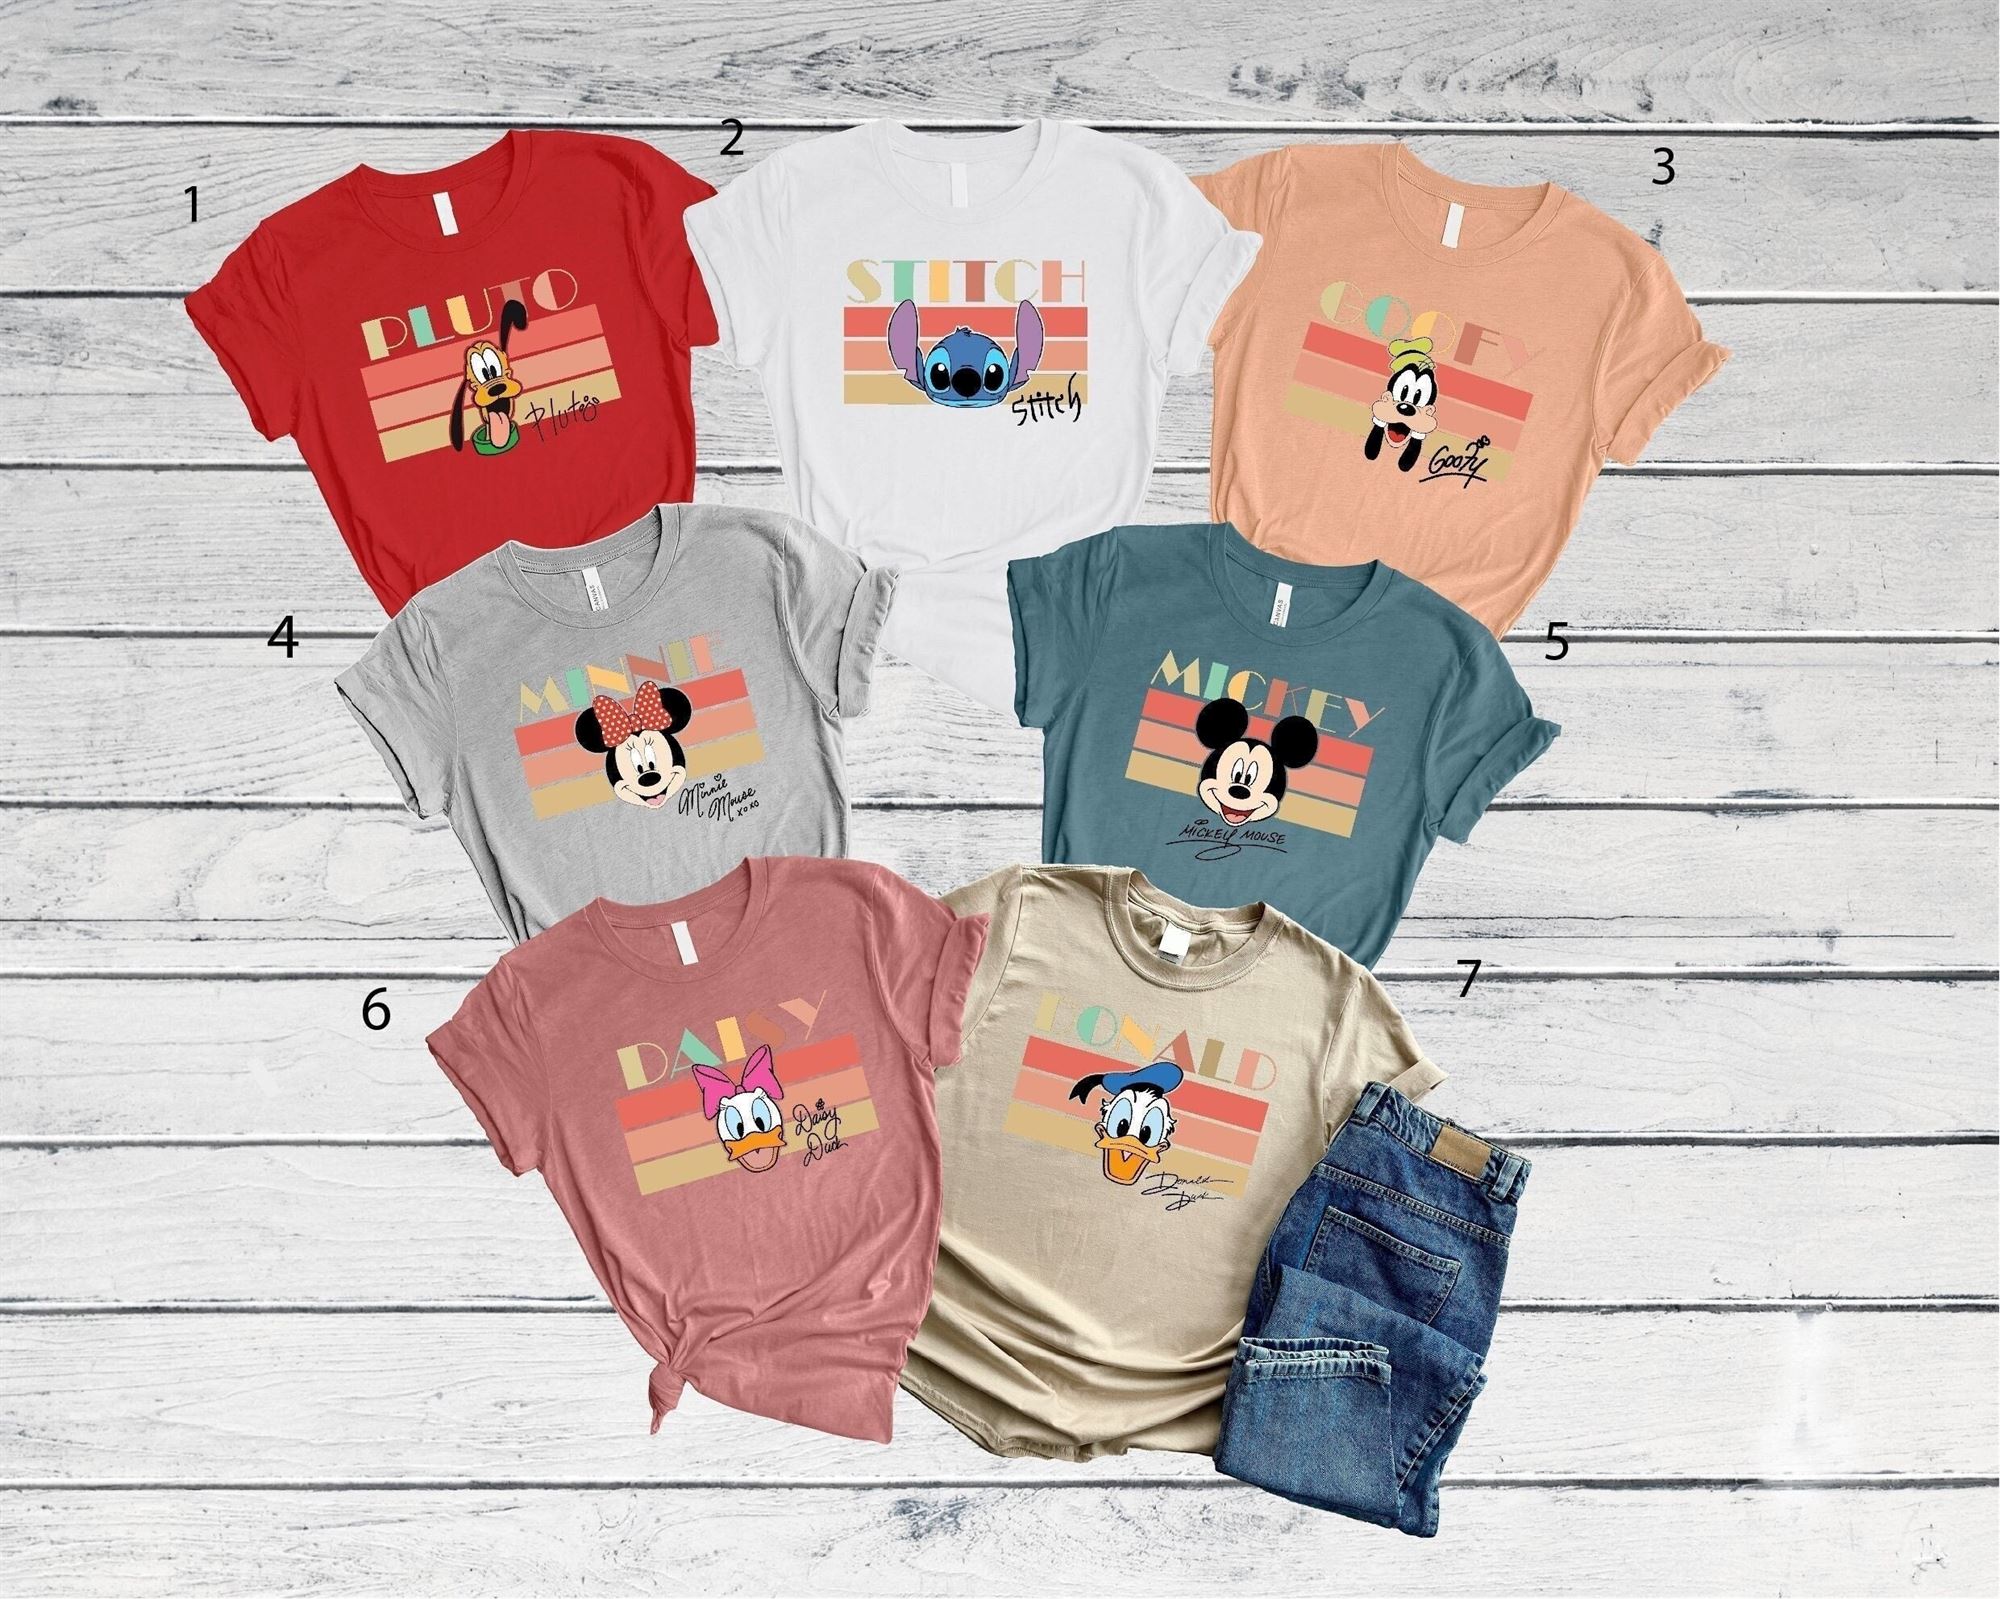 Disneyland Young People Matching Personalized Disney Vacation Shirts Disneyland Trip Tees For Youngsters 